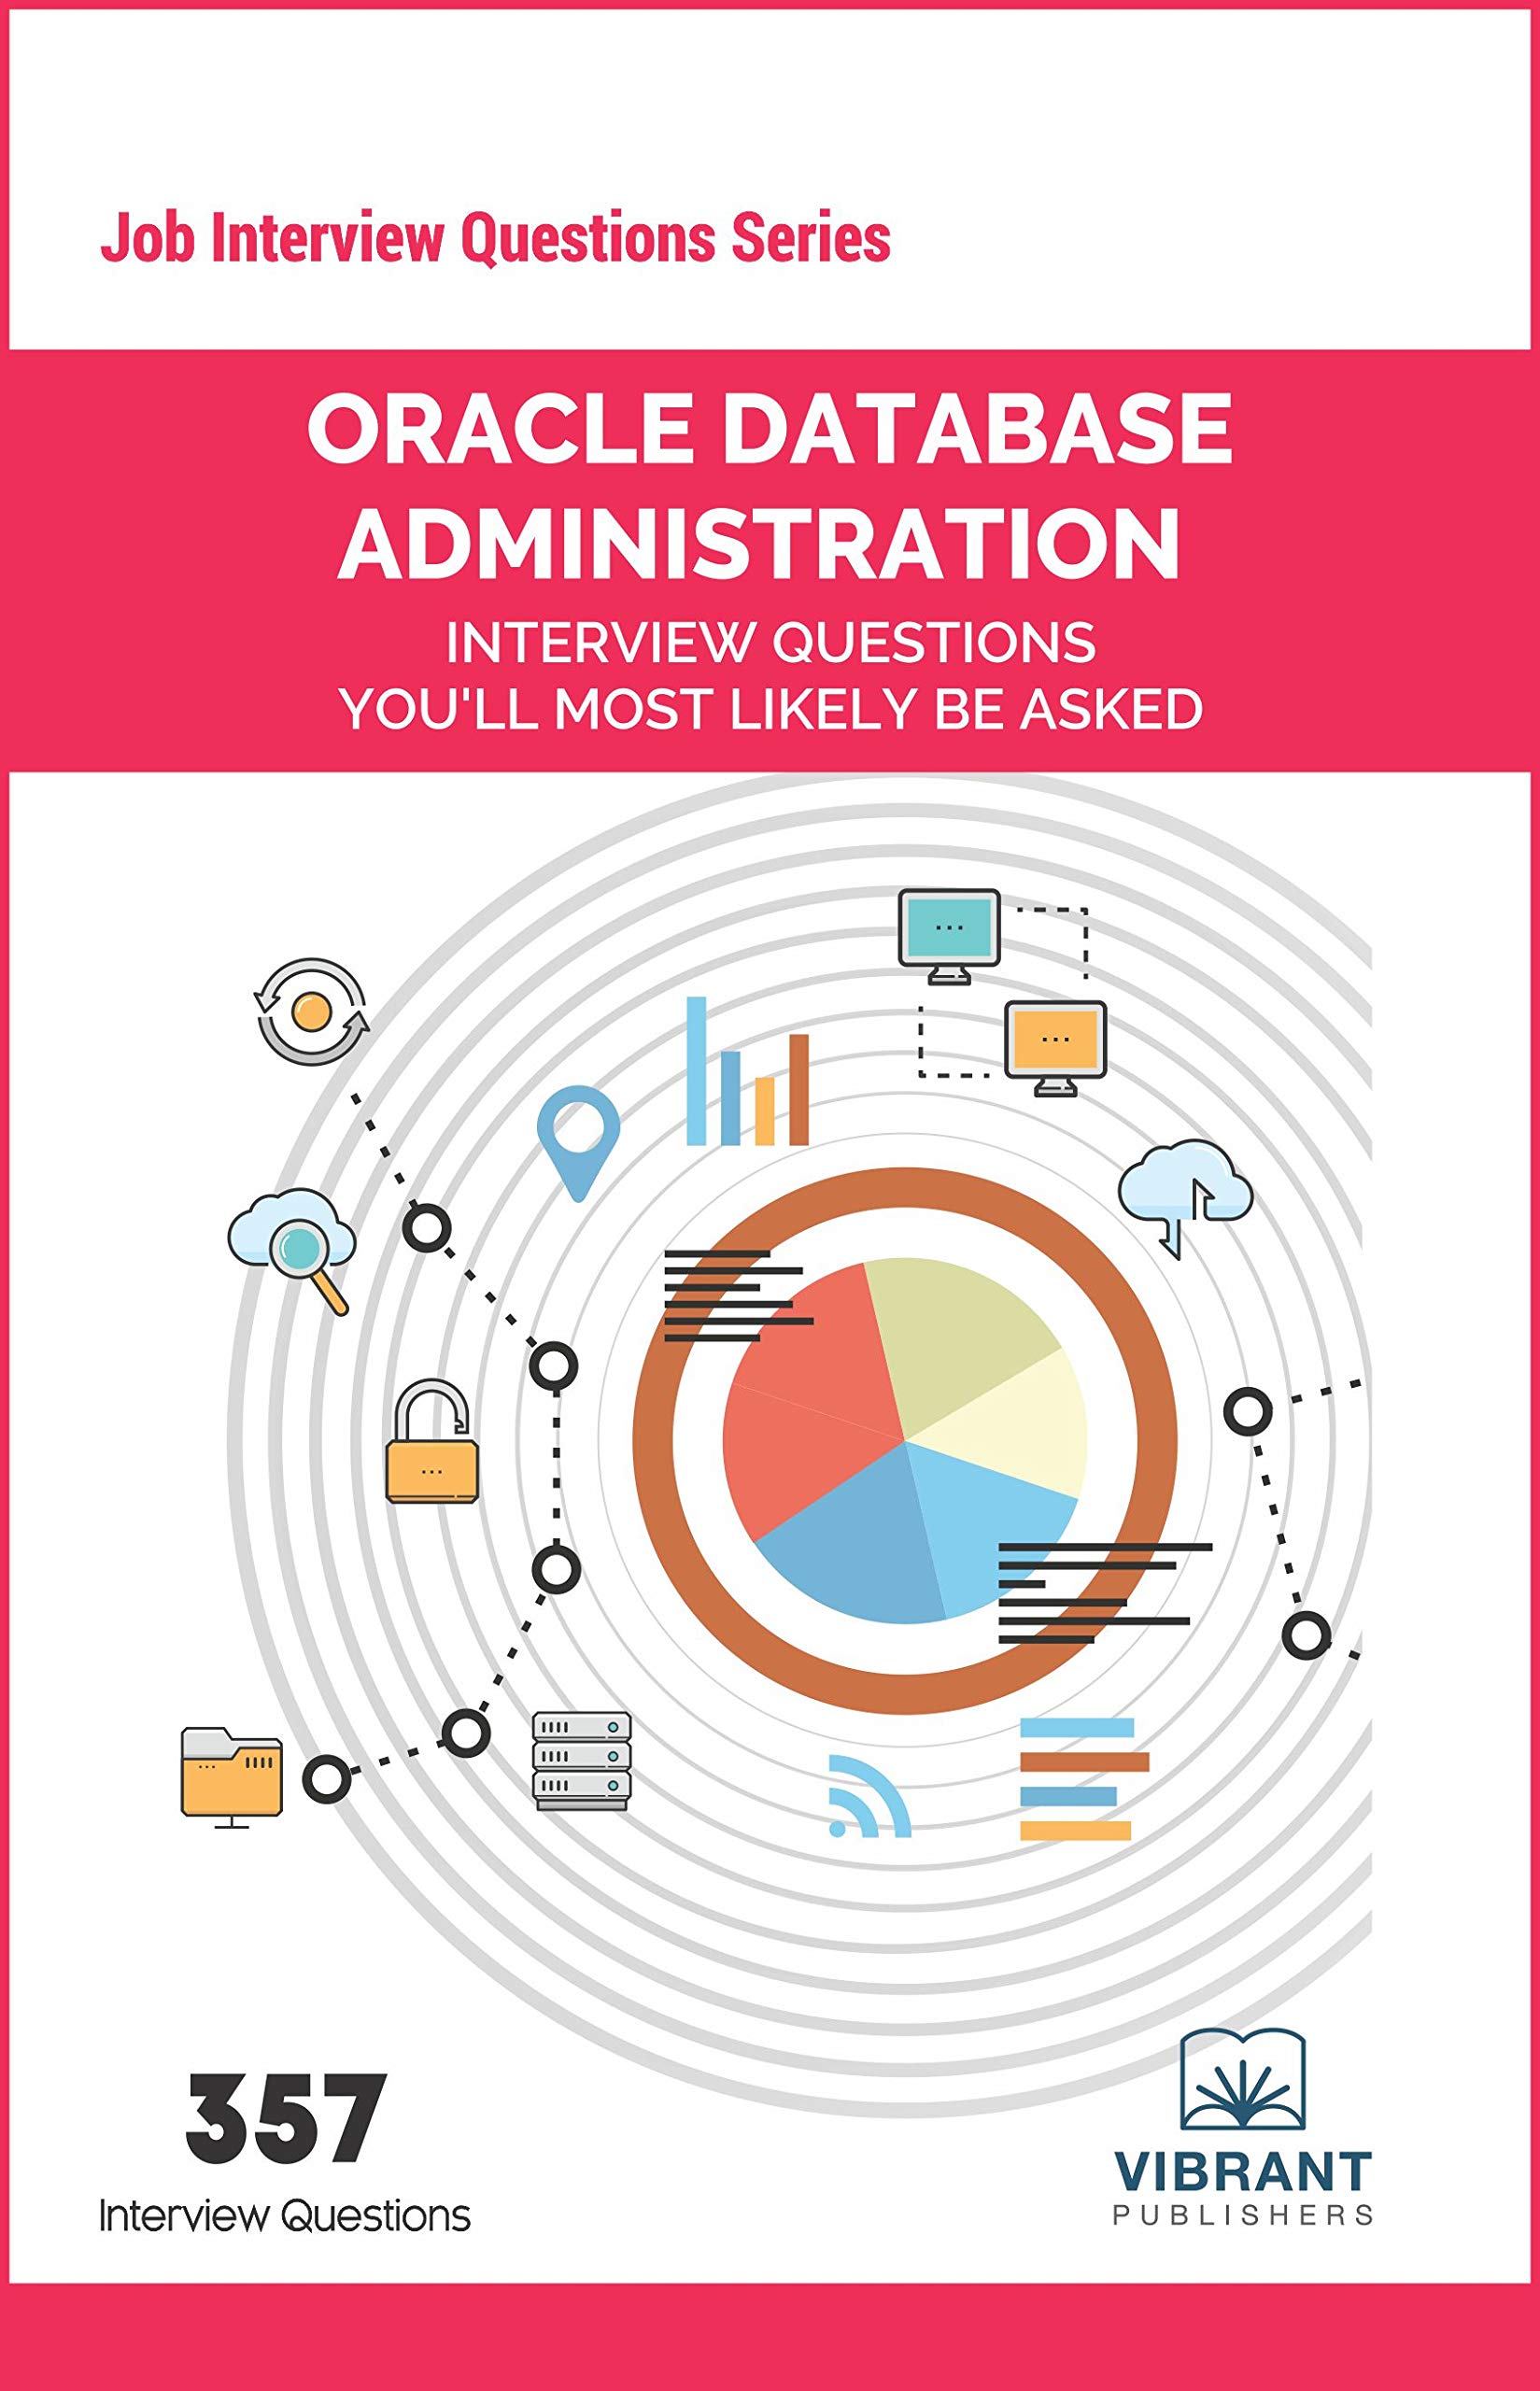 Oracle Database Administration Interview Questions You'll Most Likely Be Asked (Job Interview Questions Series)